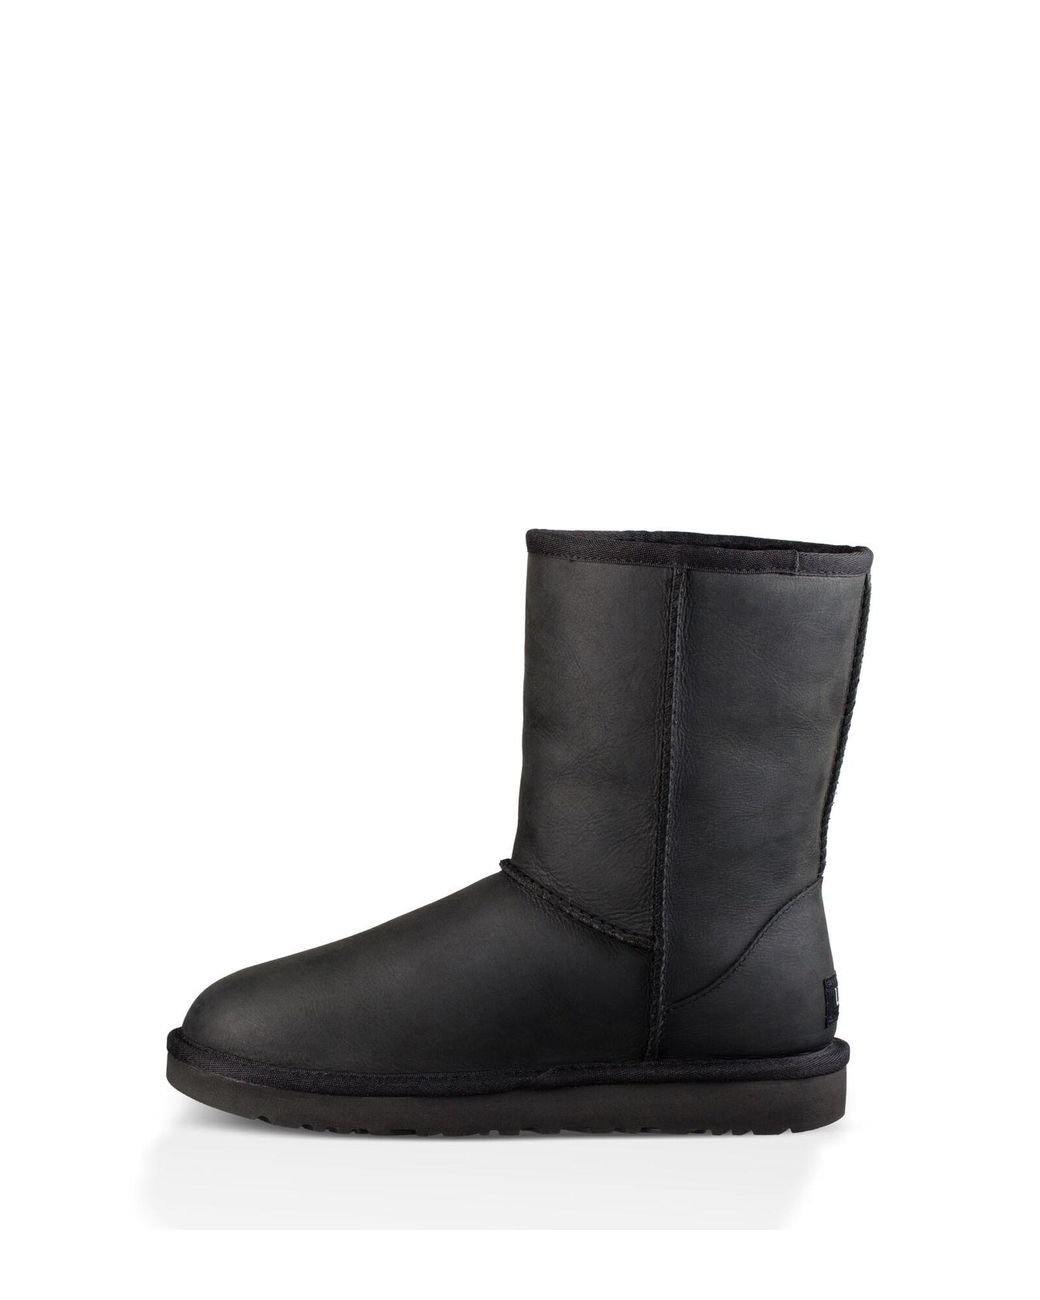 UGG Classic Short Leather Classic Short Leather in Black - Save 26% - Lyst